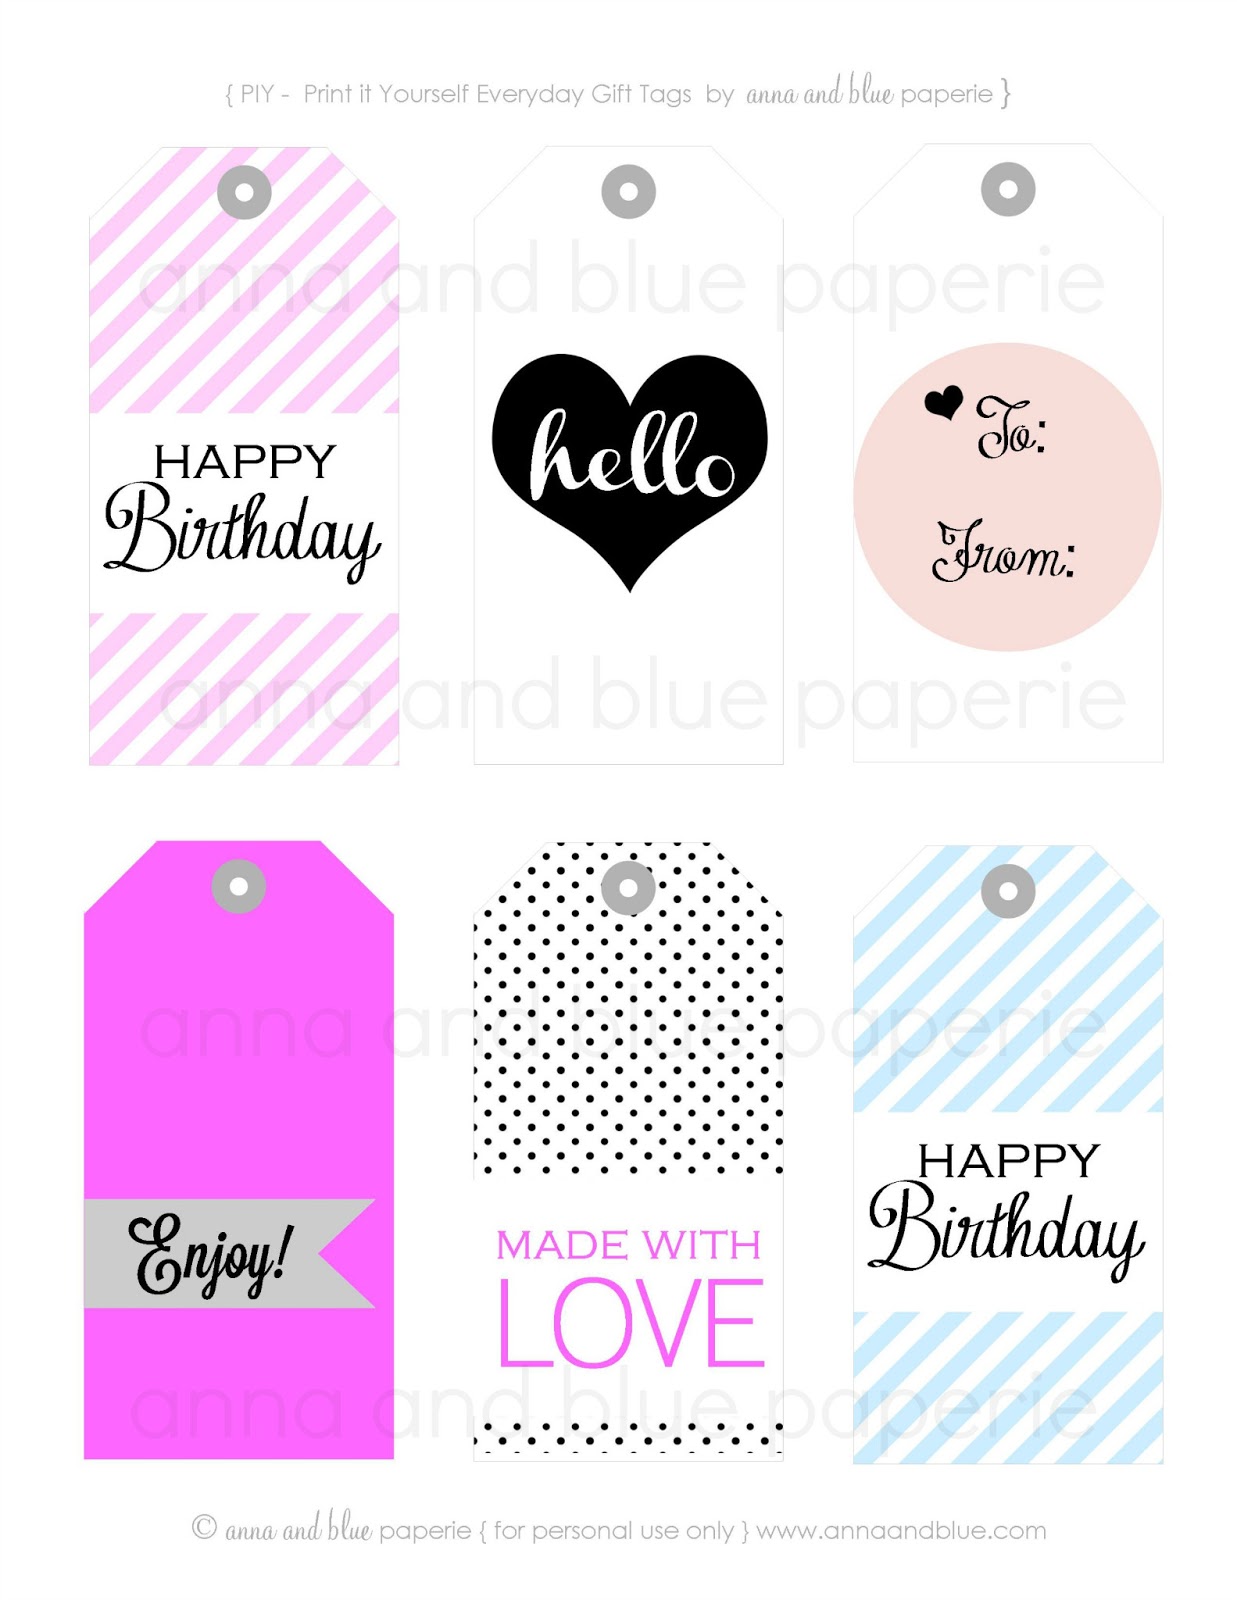 Make Your Own Custom Gift Tags With These Free Printable Templates 